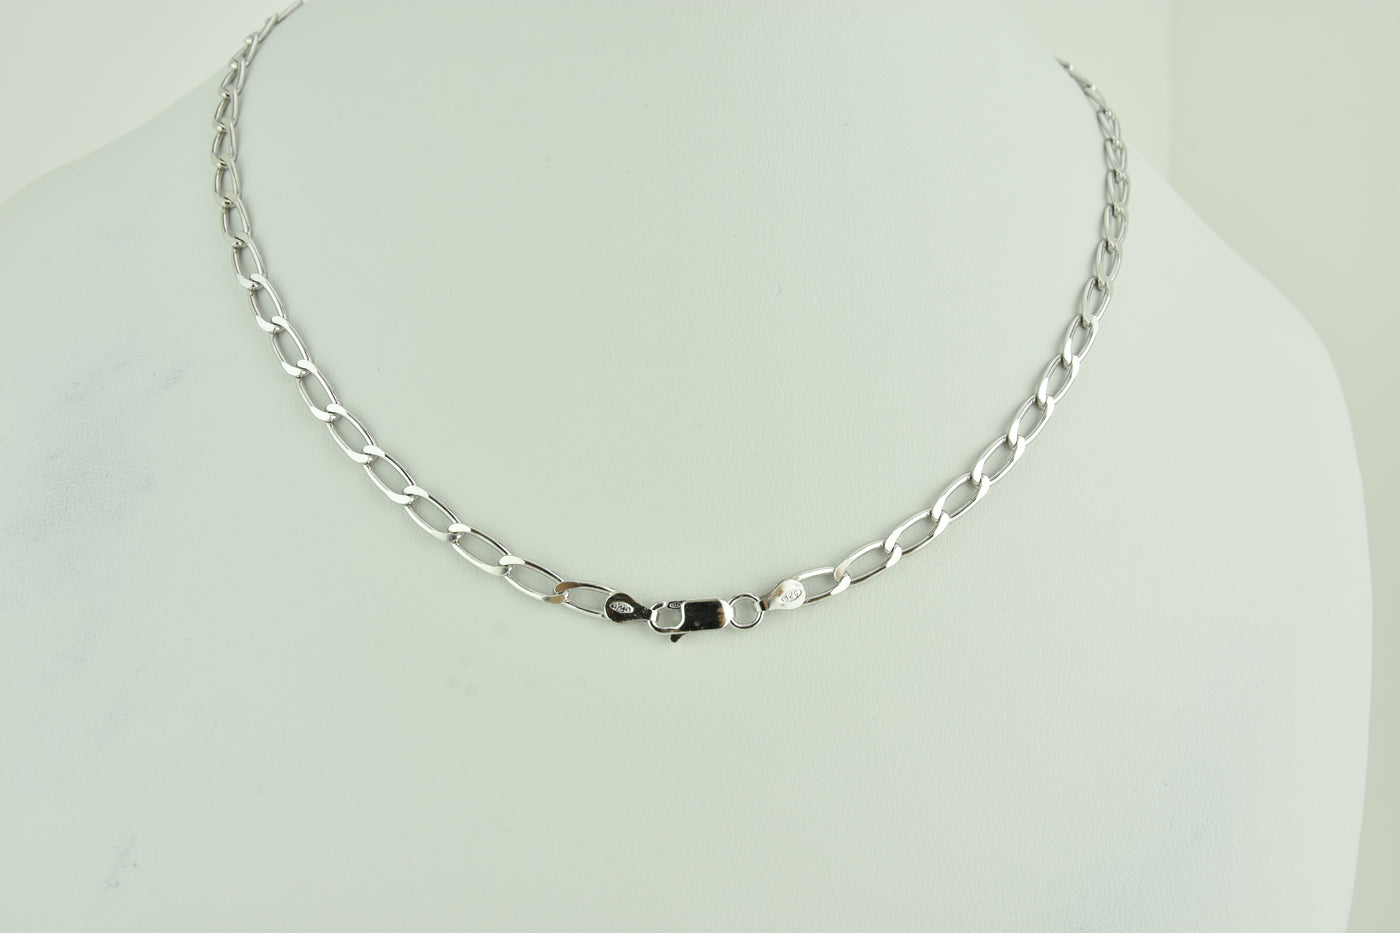 Open Link Sterling Silver Chain with White Rhodium plate